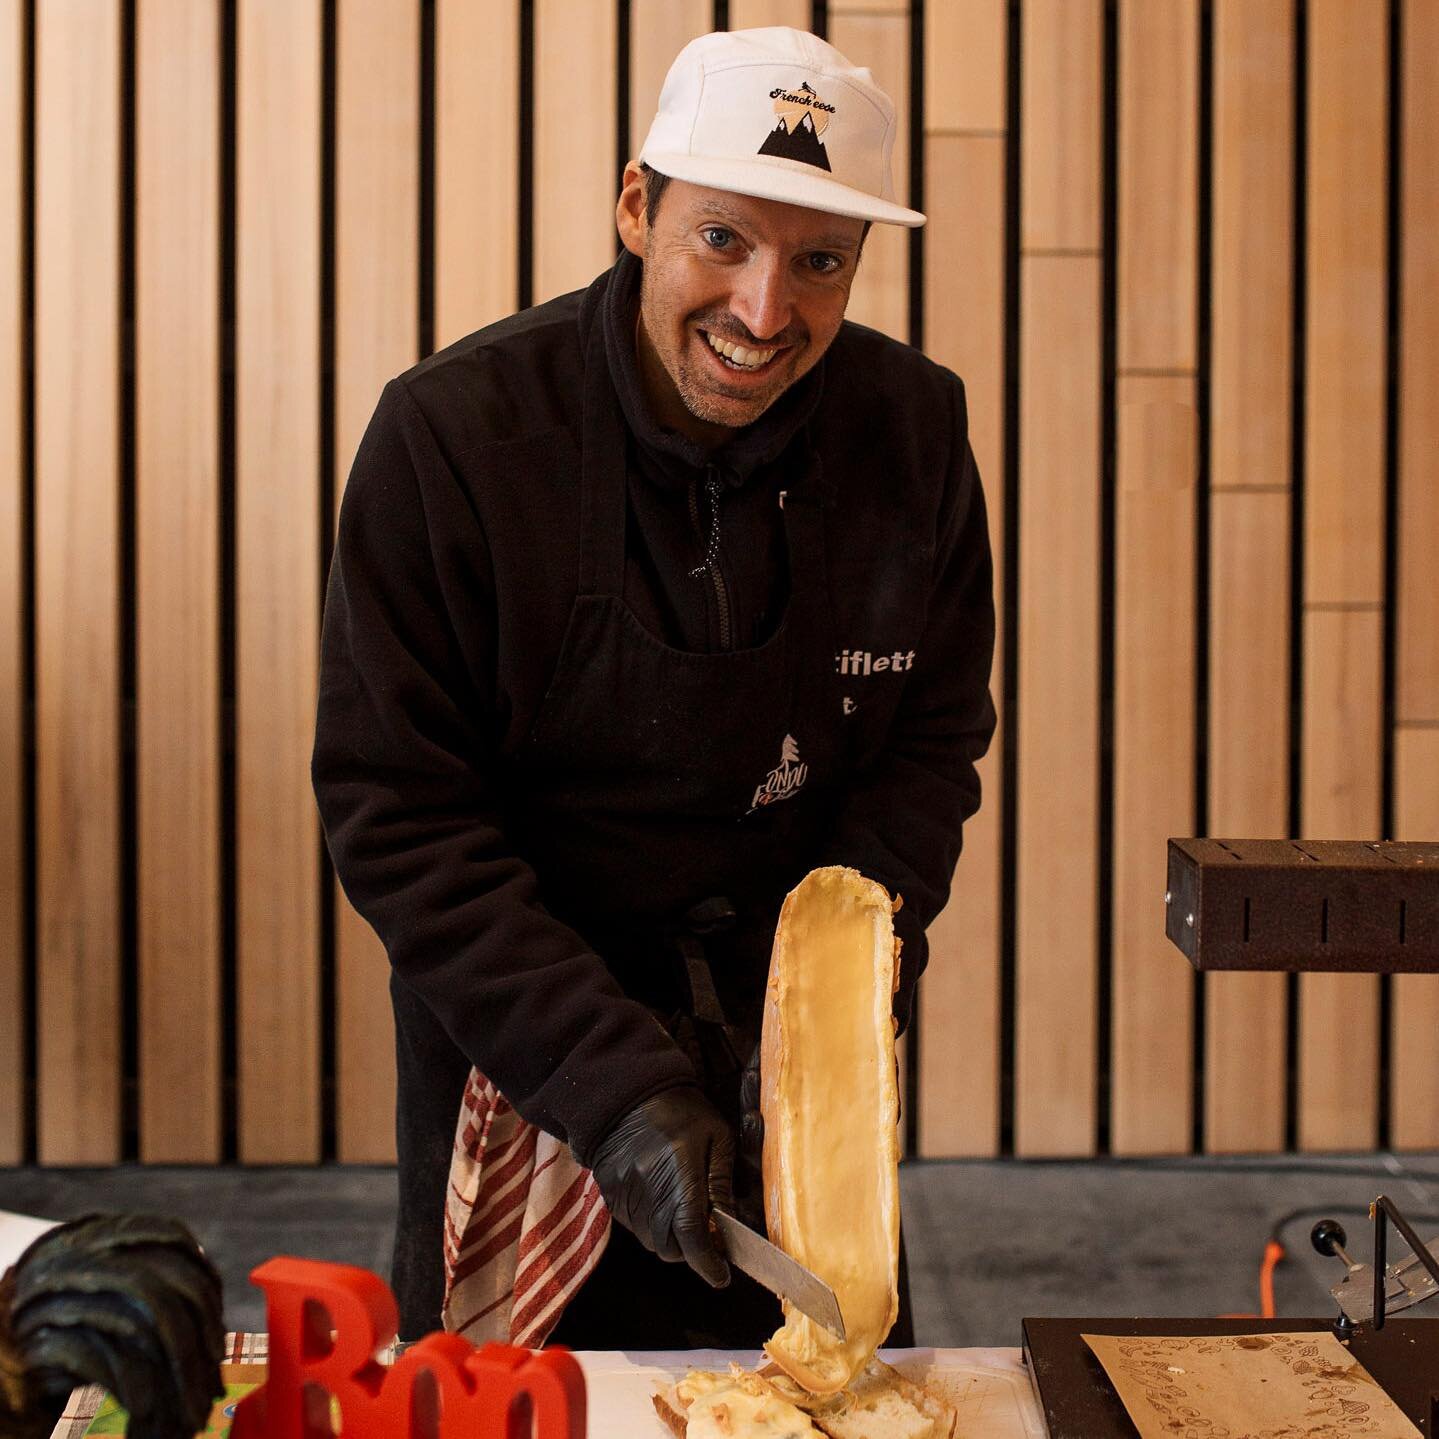 Founder and Cheese Specialist Michael Loiodice (@frencheesewhistler) was born and raised in the French Alps, where he began working for his family restaurant at a young age.⁠
⁠
Later in life, he moved to Whistler, where he began sharing his love of c